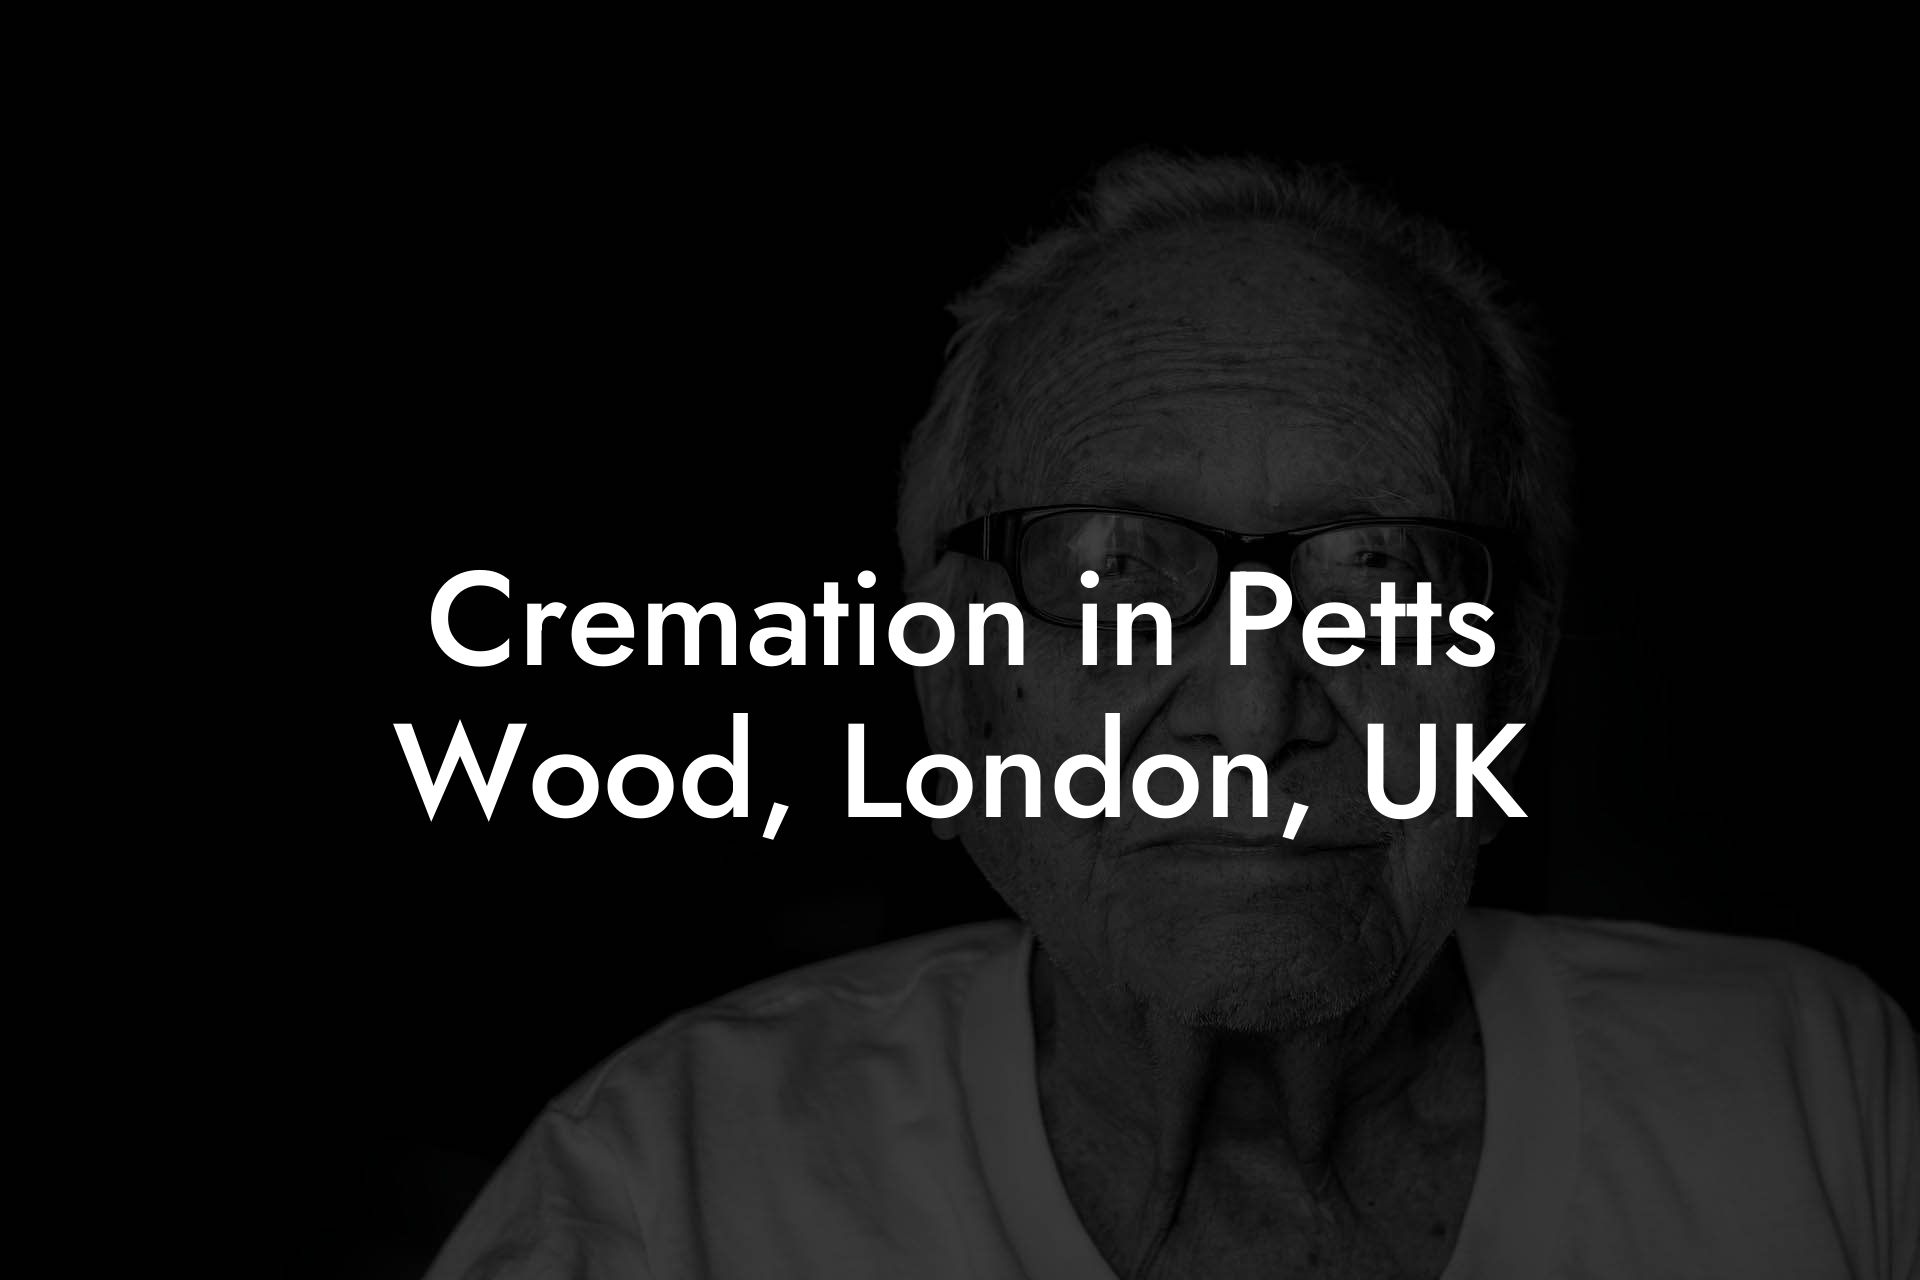 Cremation in Petts Wood, London, UK